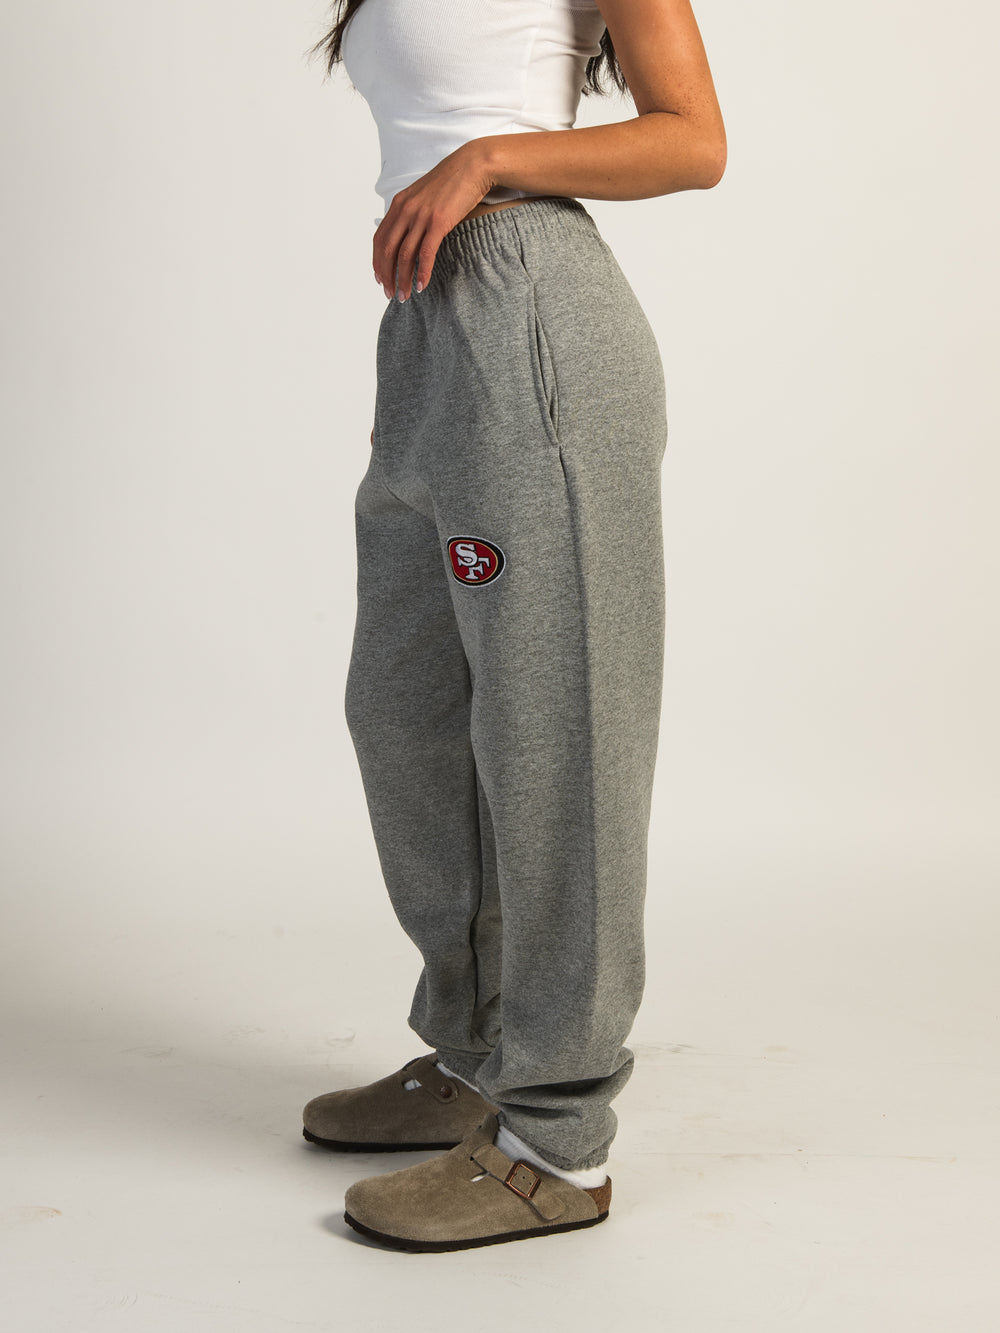 RUSSELL SAN FRANCISCO 49ERS EMBROIDERED SWEATPANTS